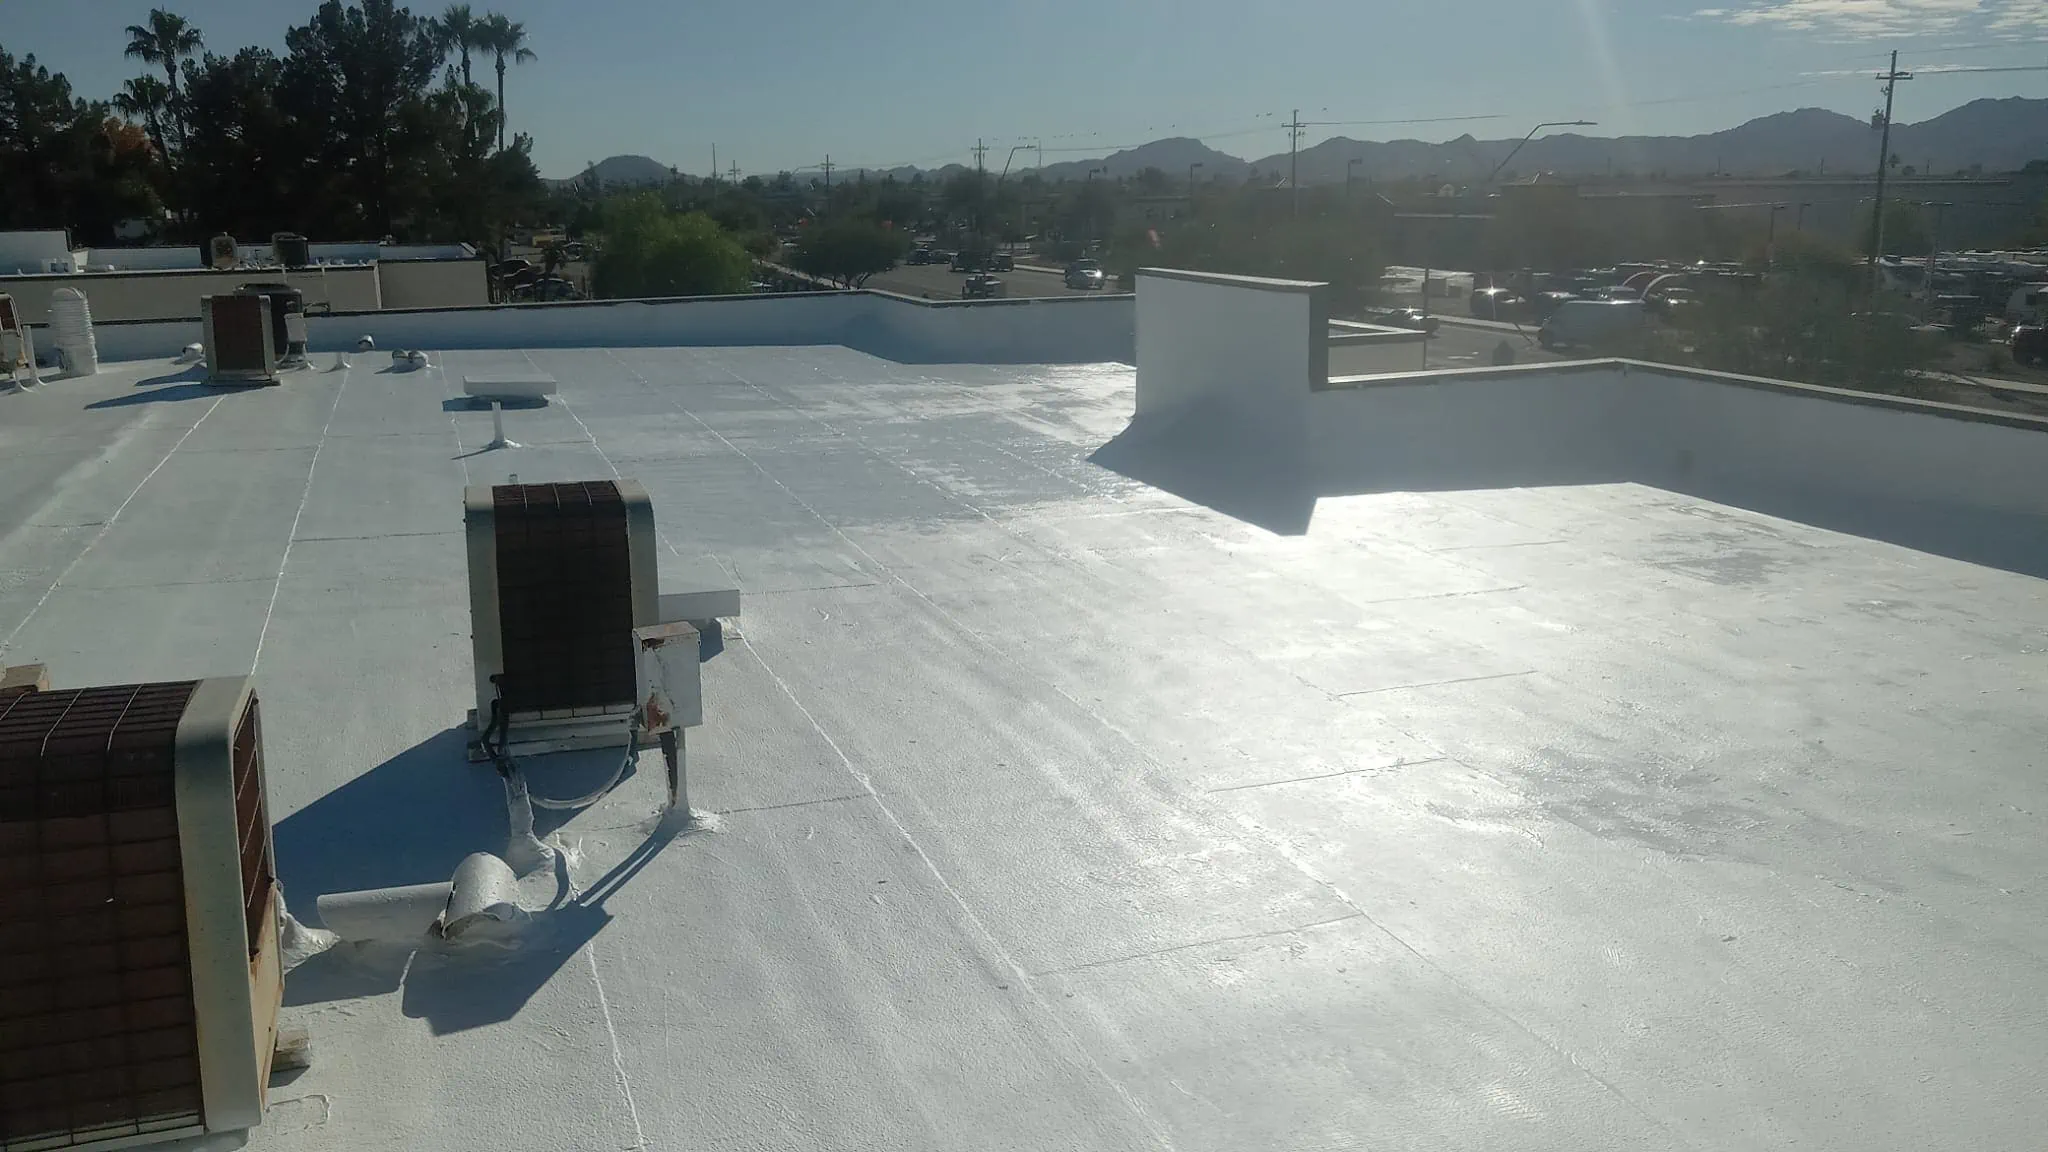 acrylic roof coating on commercial building in phoenix by behmer